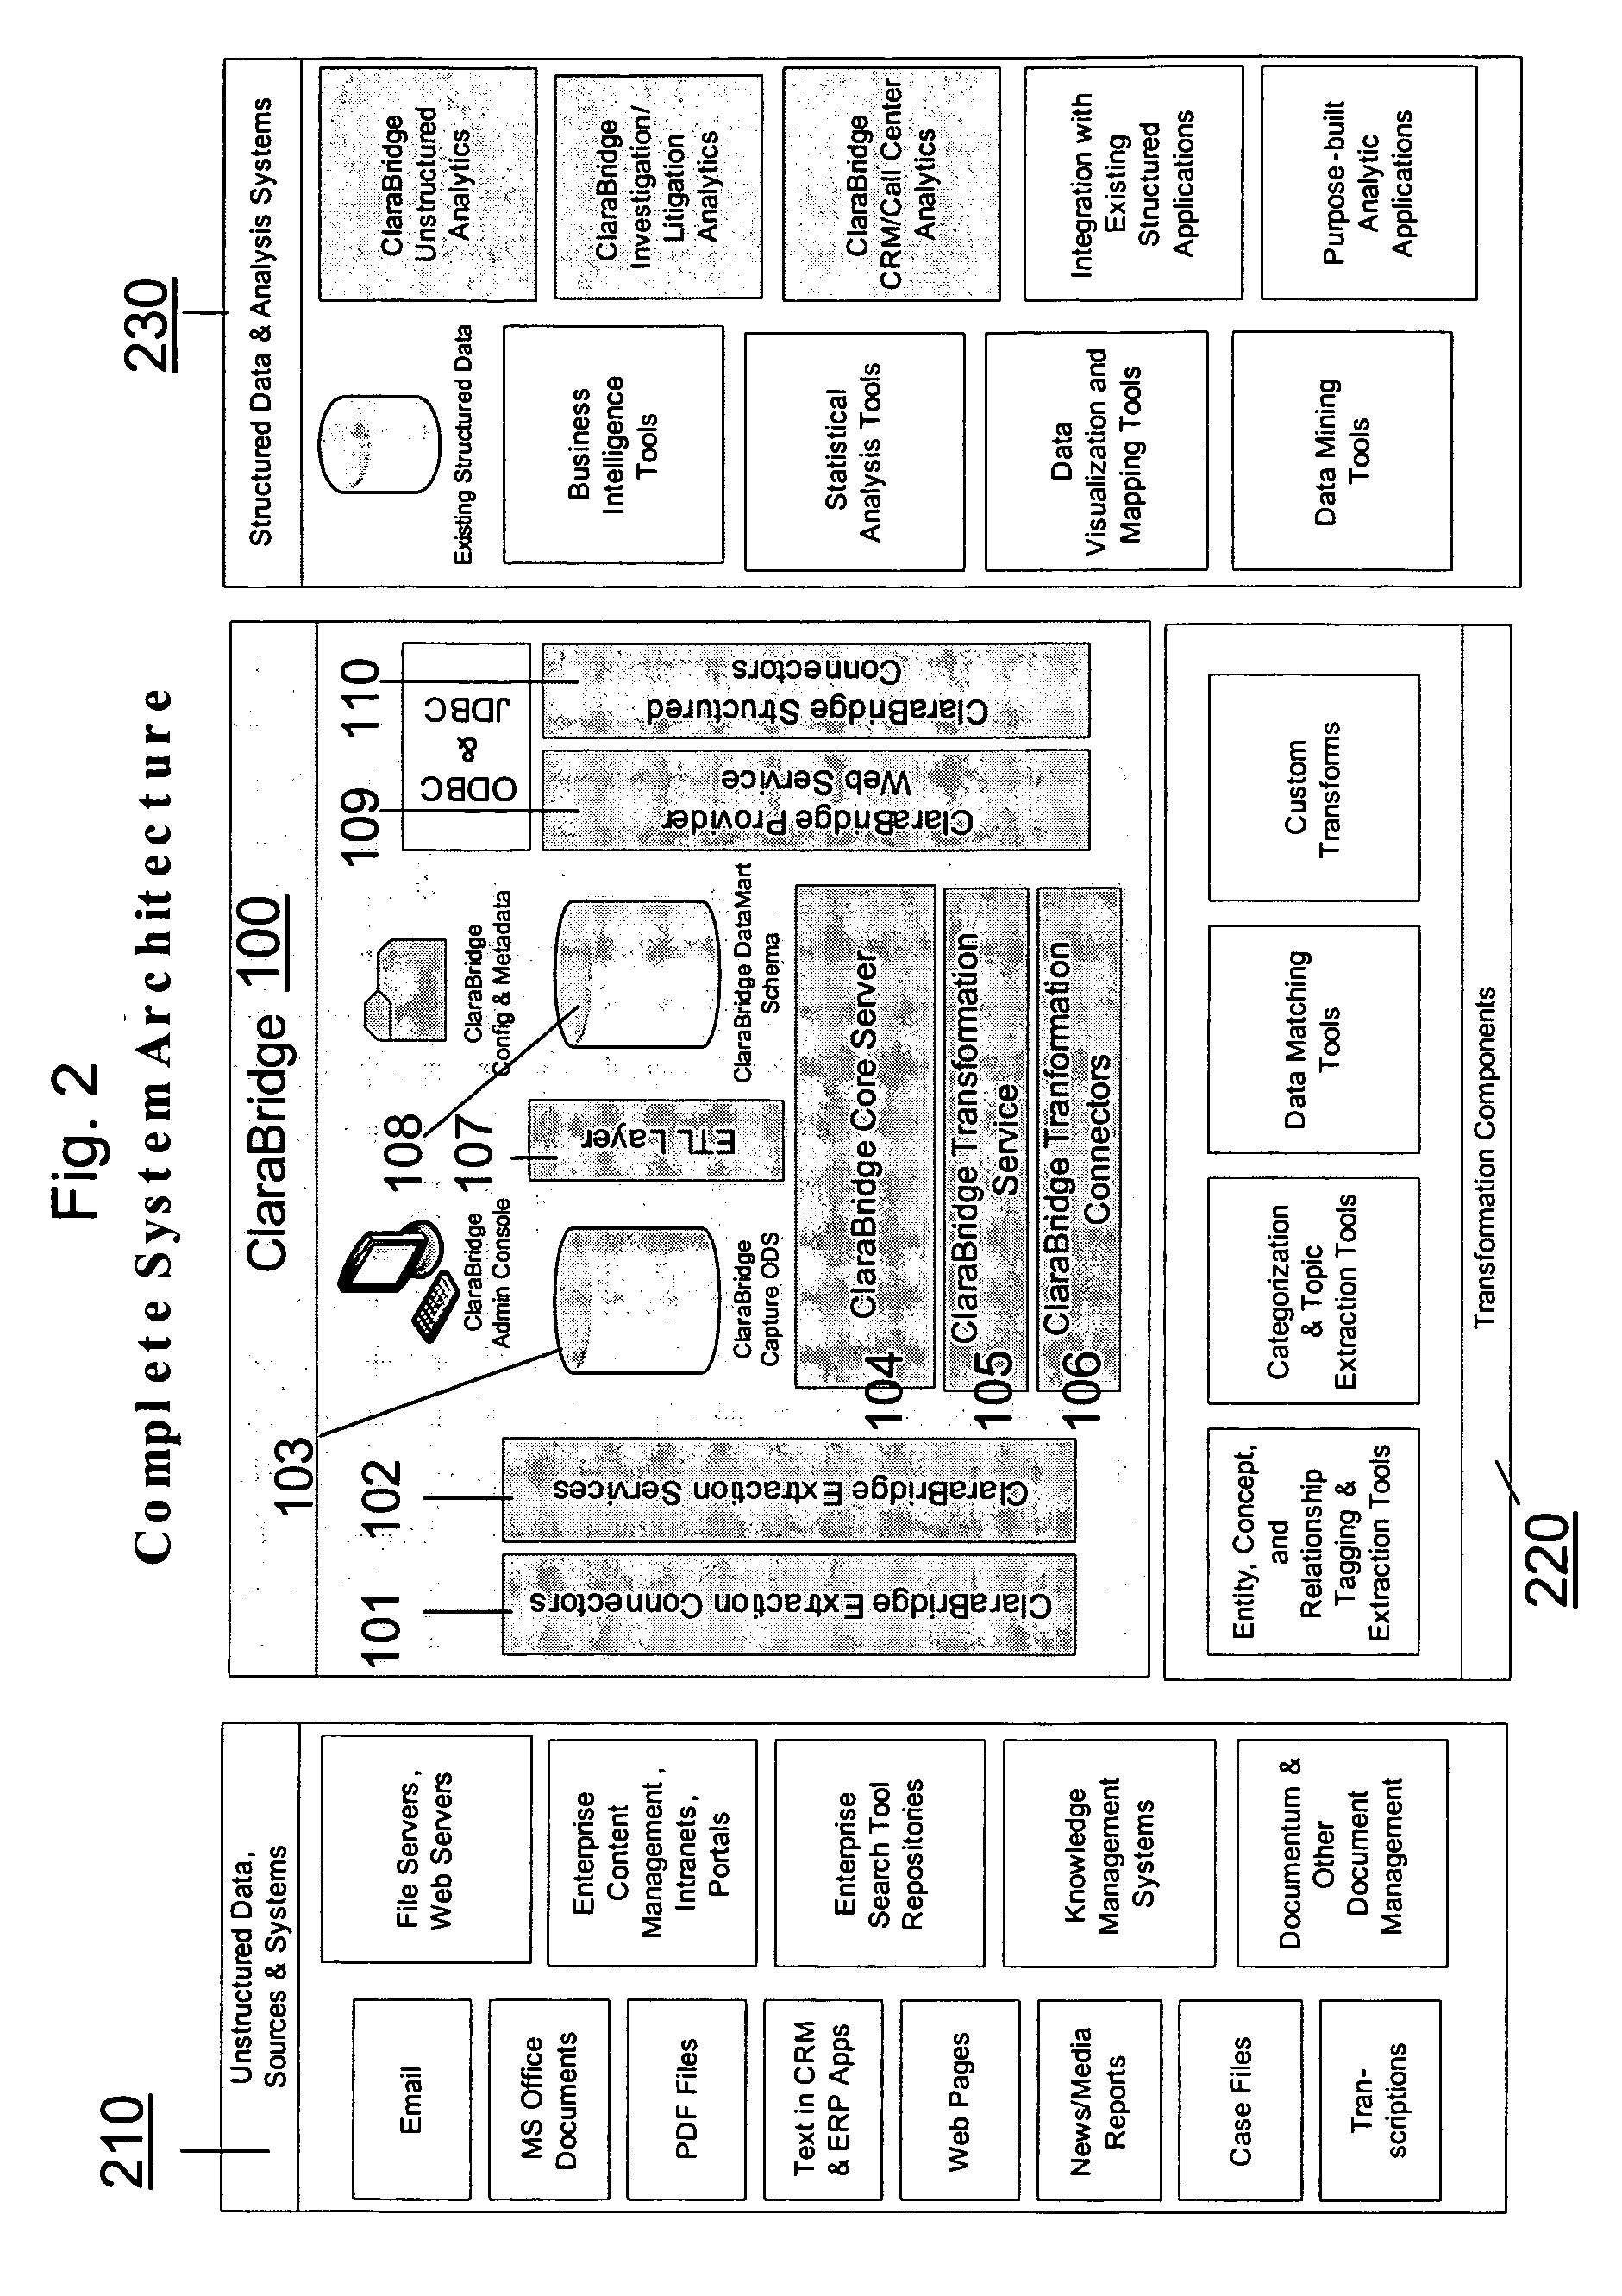 System and method of making unstructured data available to structured data analysis tools